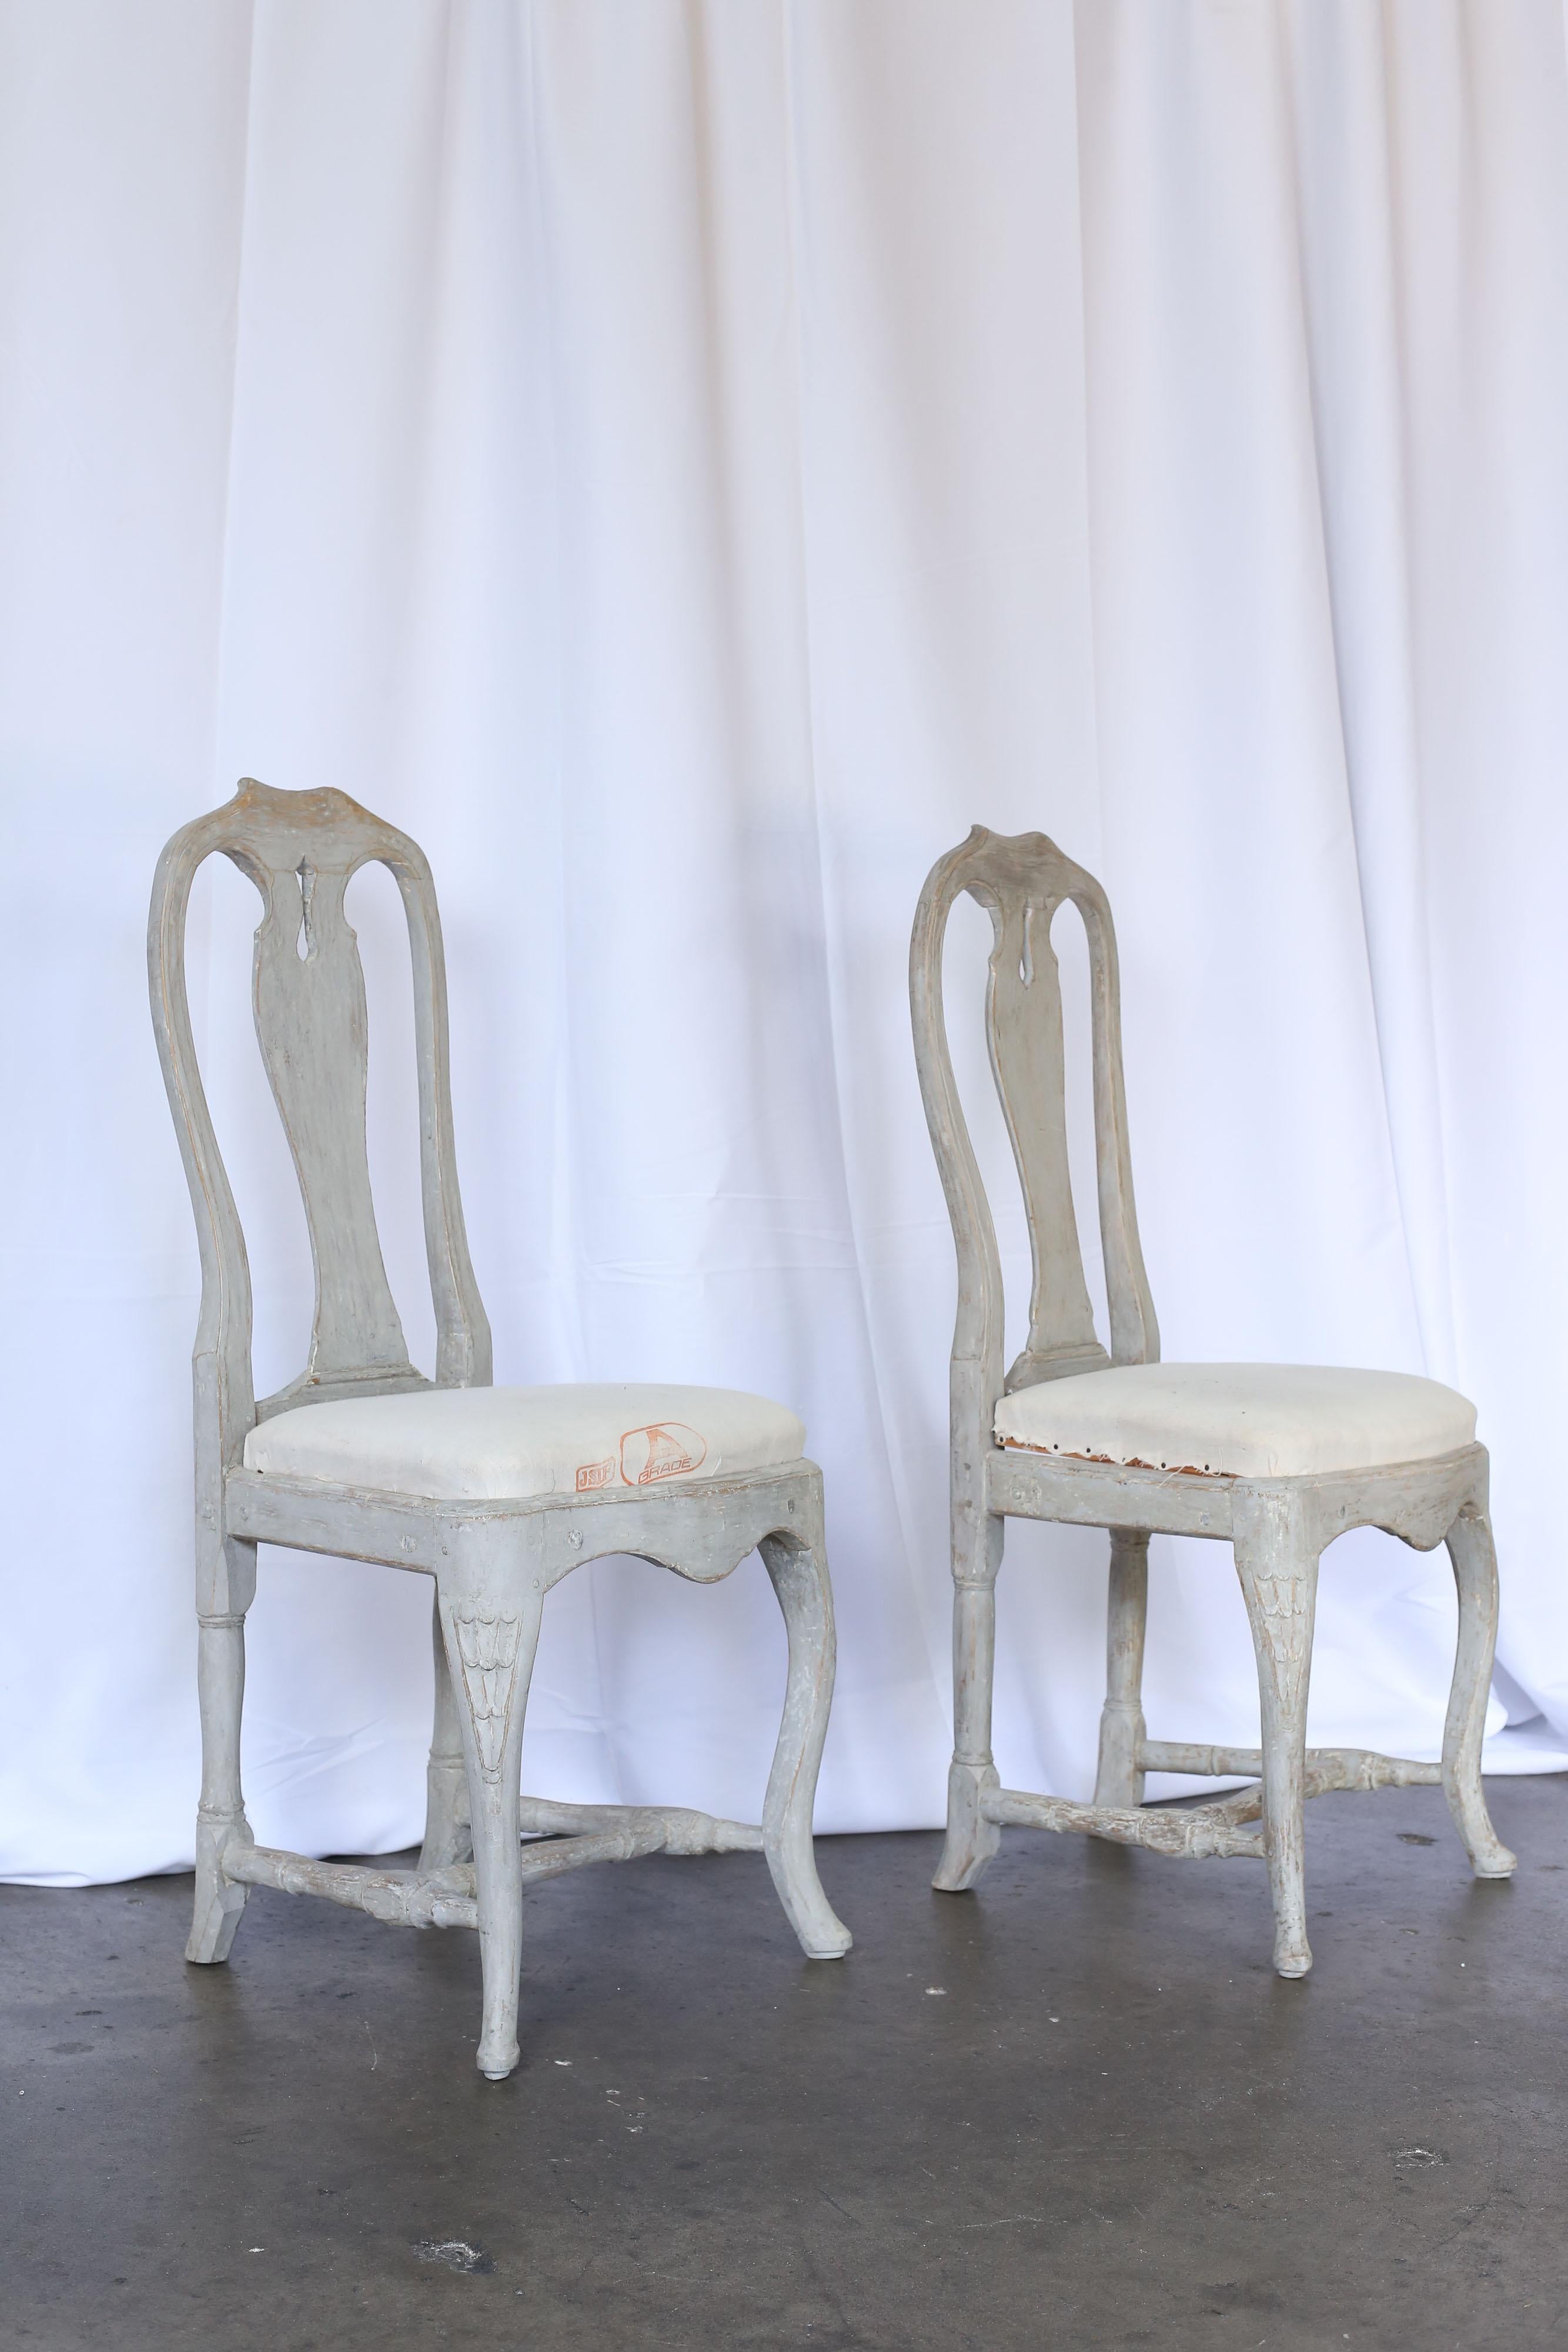 Pair of Rococo chairs, period circa 1780, Sweden with original paint.